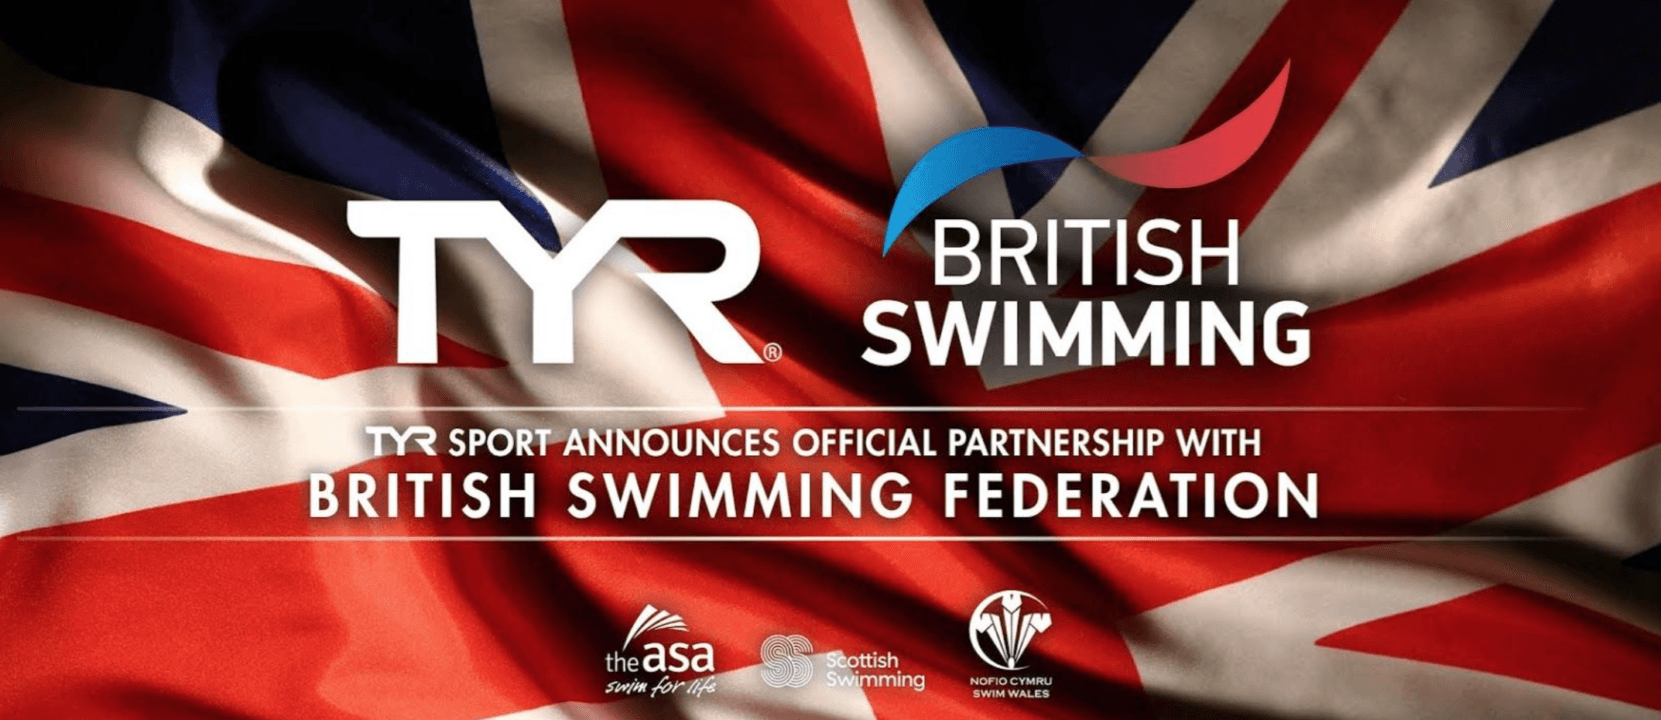 TYR Sport to be Official Product Supplier of British Swimming